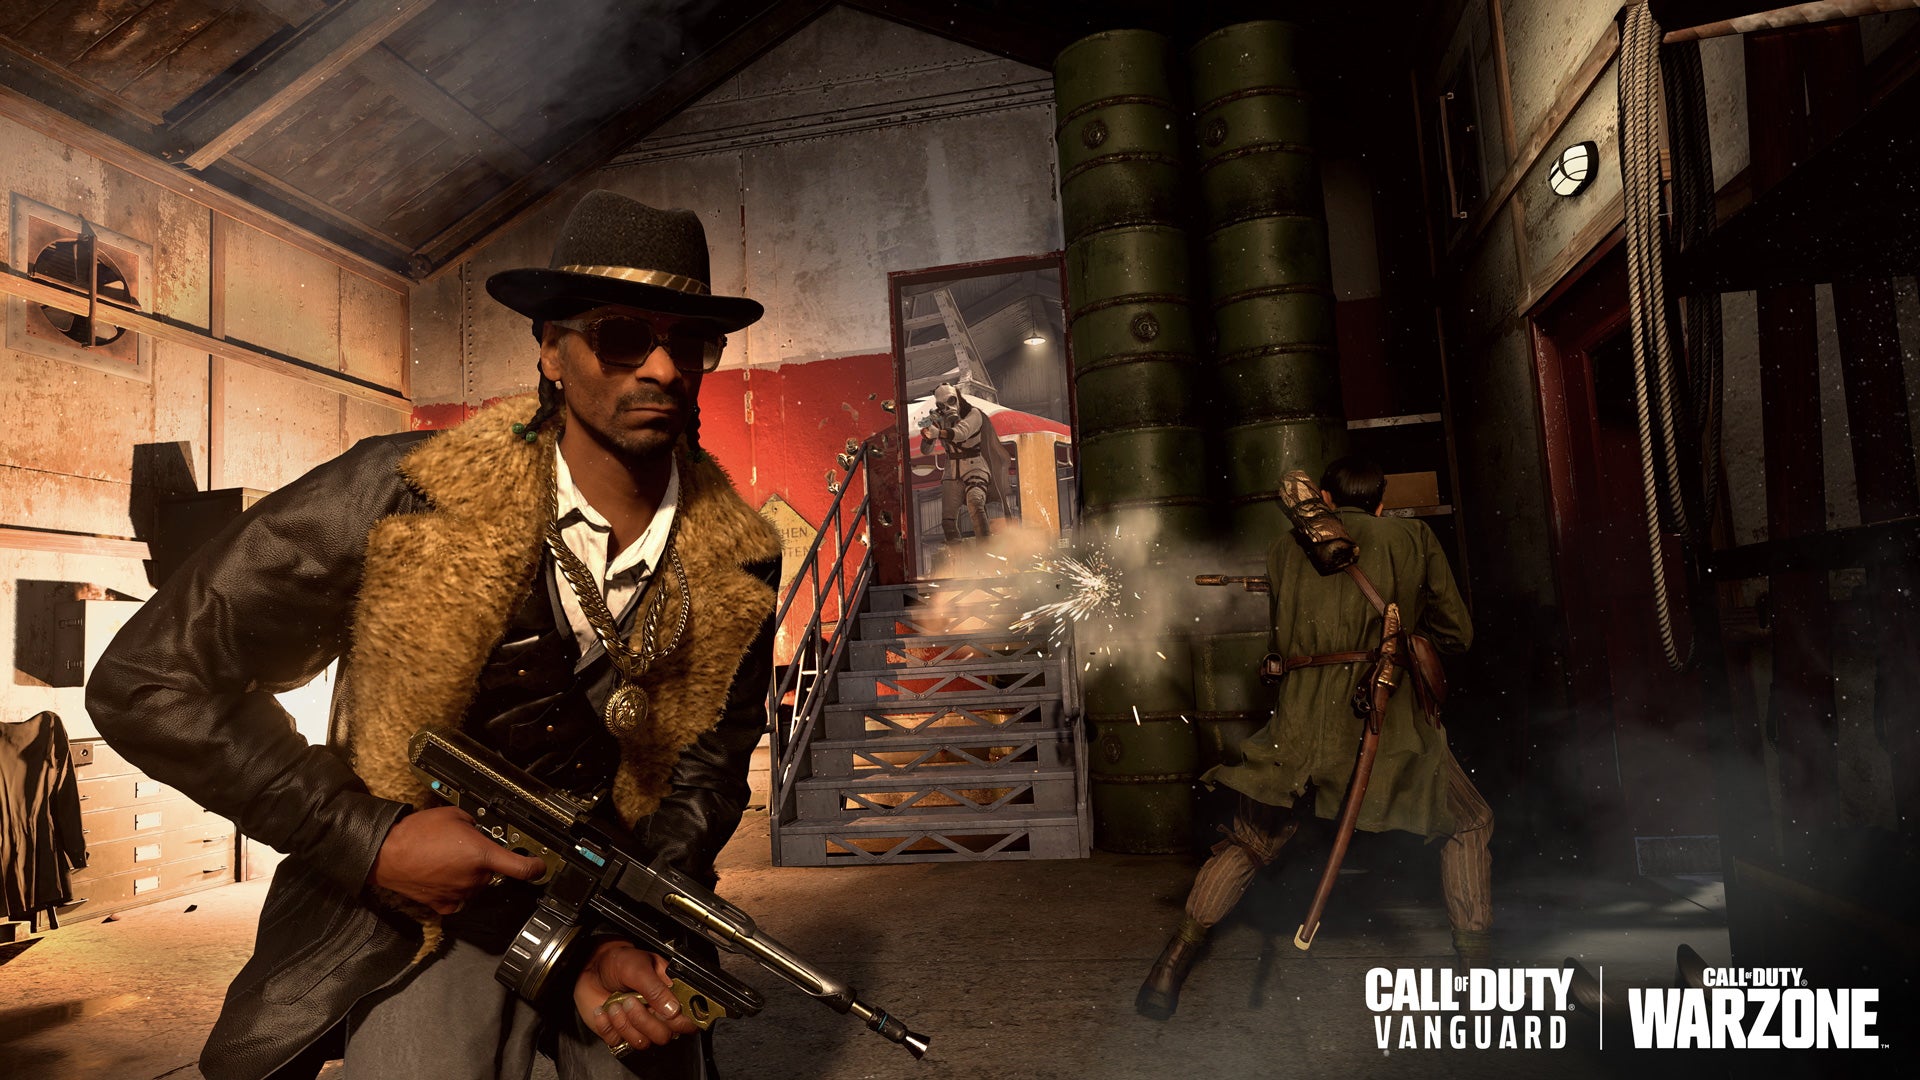 Snoop Dogg Joins Call of Duty: Warzone, Vanguard, and Mobile as a Playable Operator